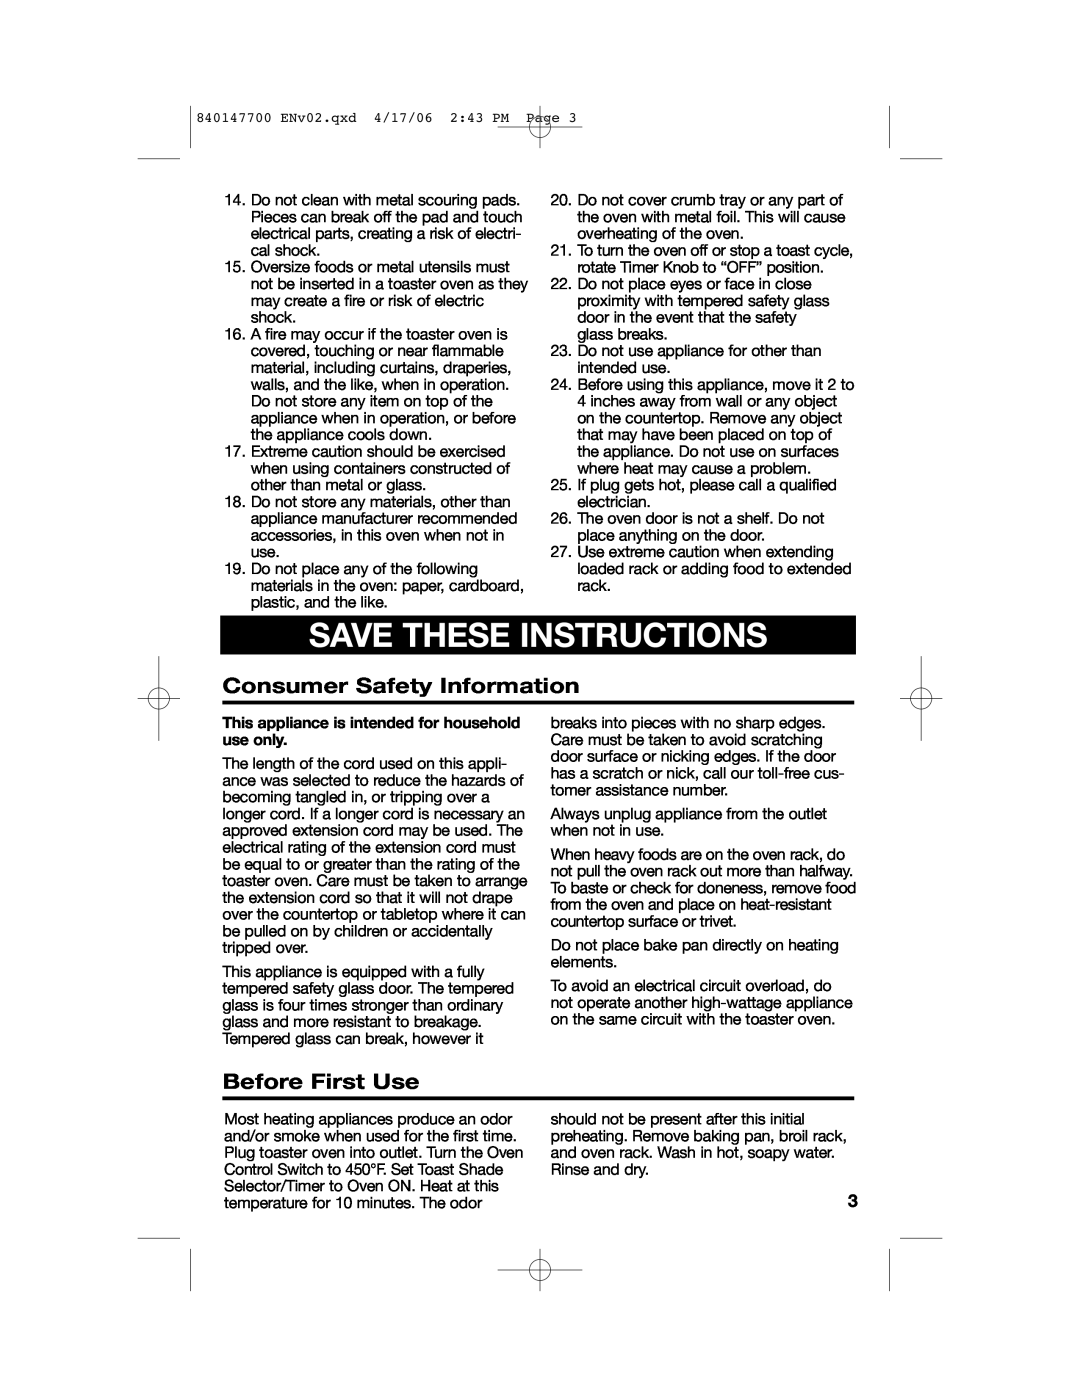 Hamilton Beach 31180 manual Save These Instructions, Consumer Safety Information, Before First Use 